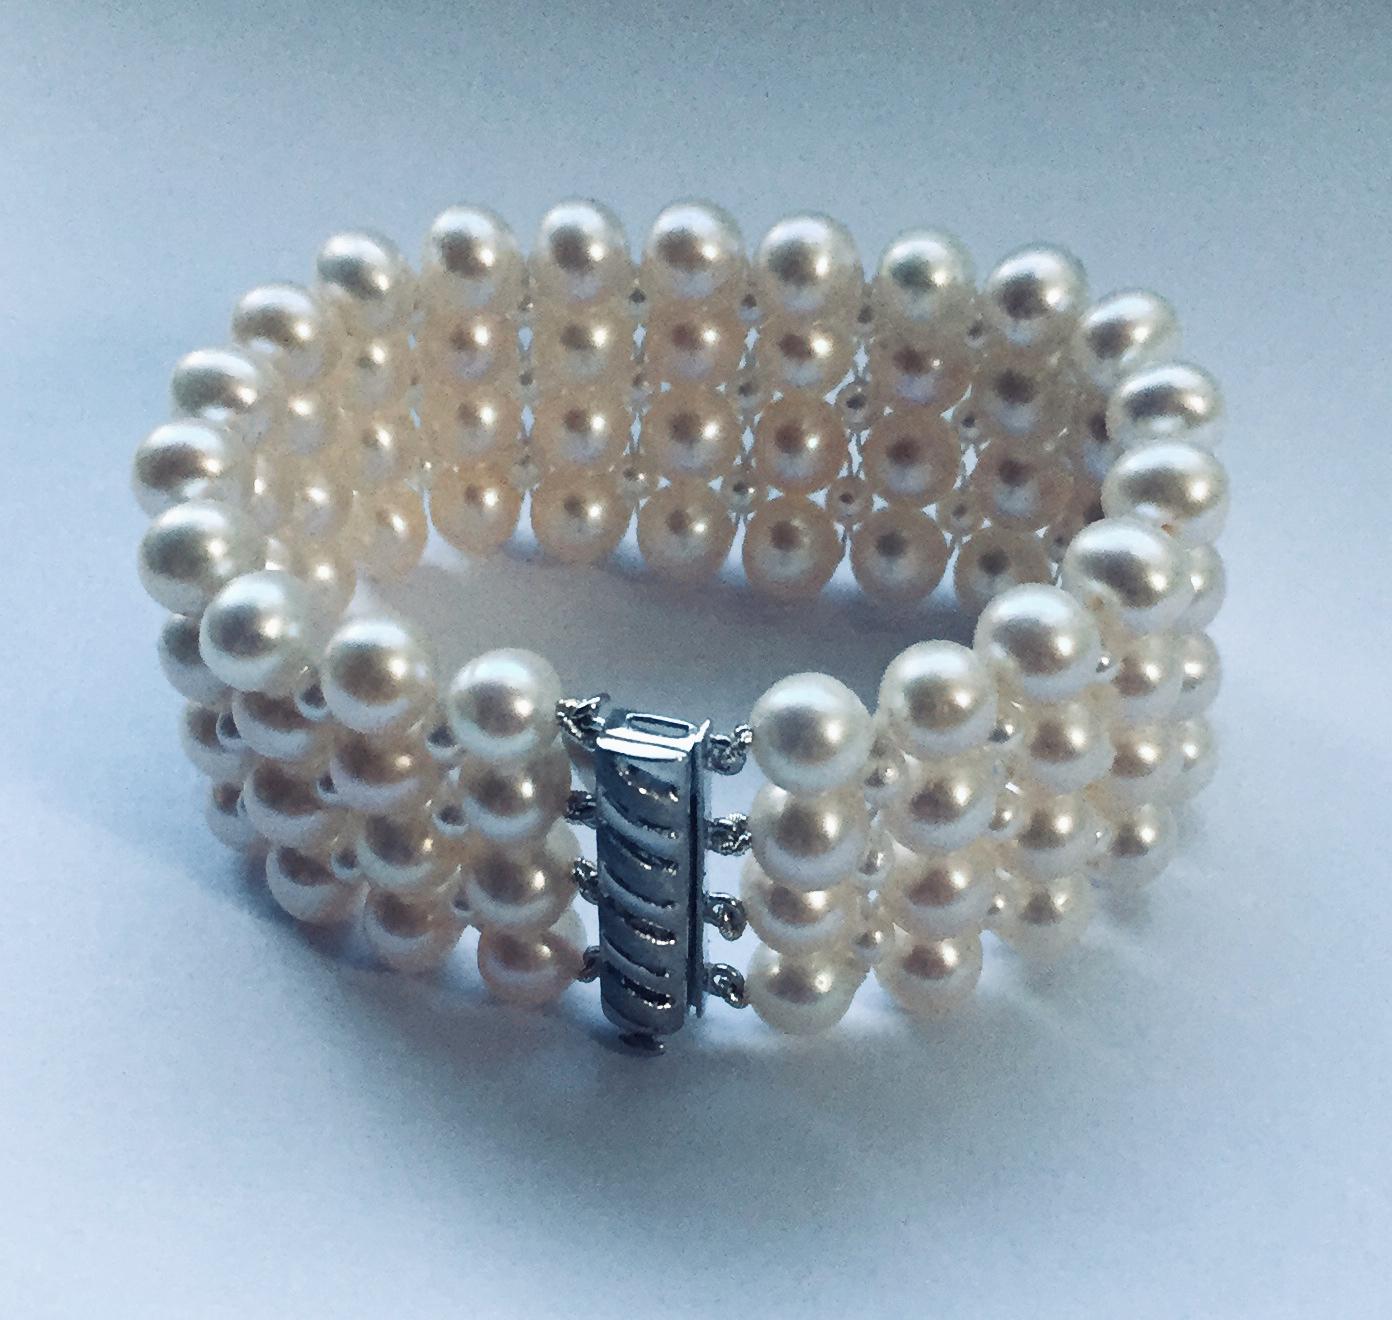 Marina J. Hand-Woven Pearl Bracelet with 14 Karat White Gold Plated Clasp 1